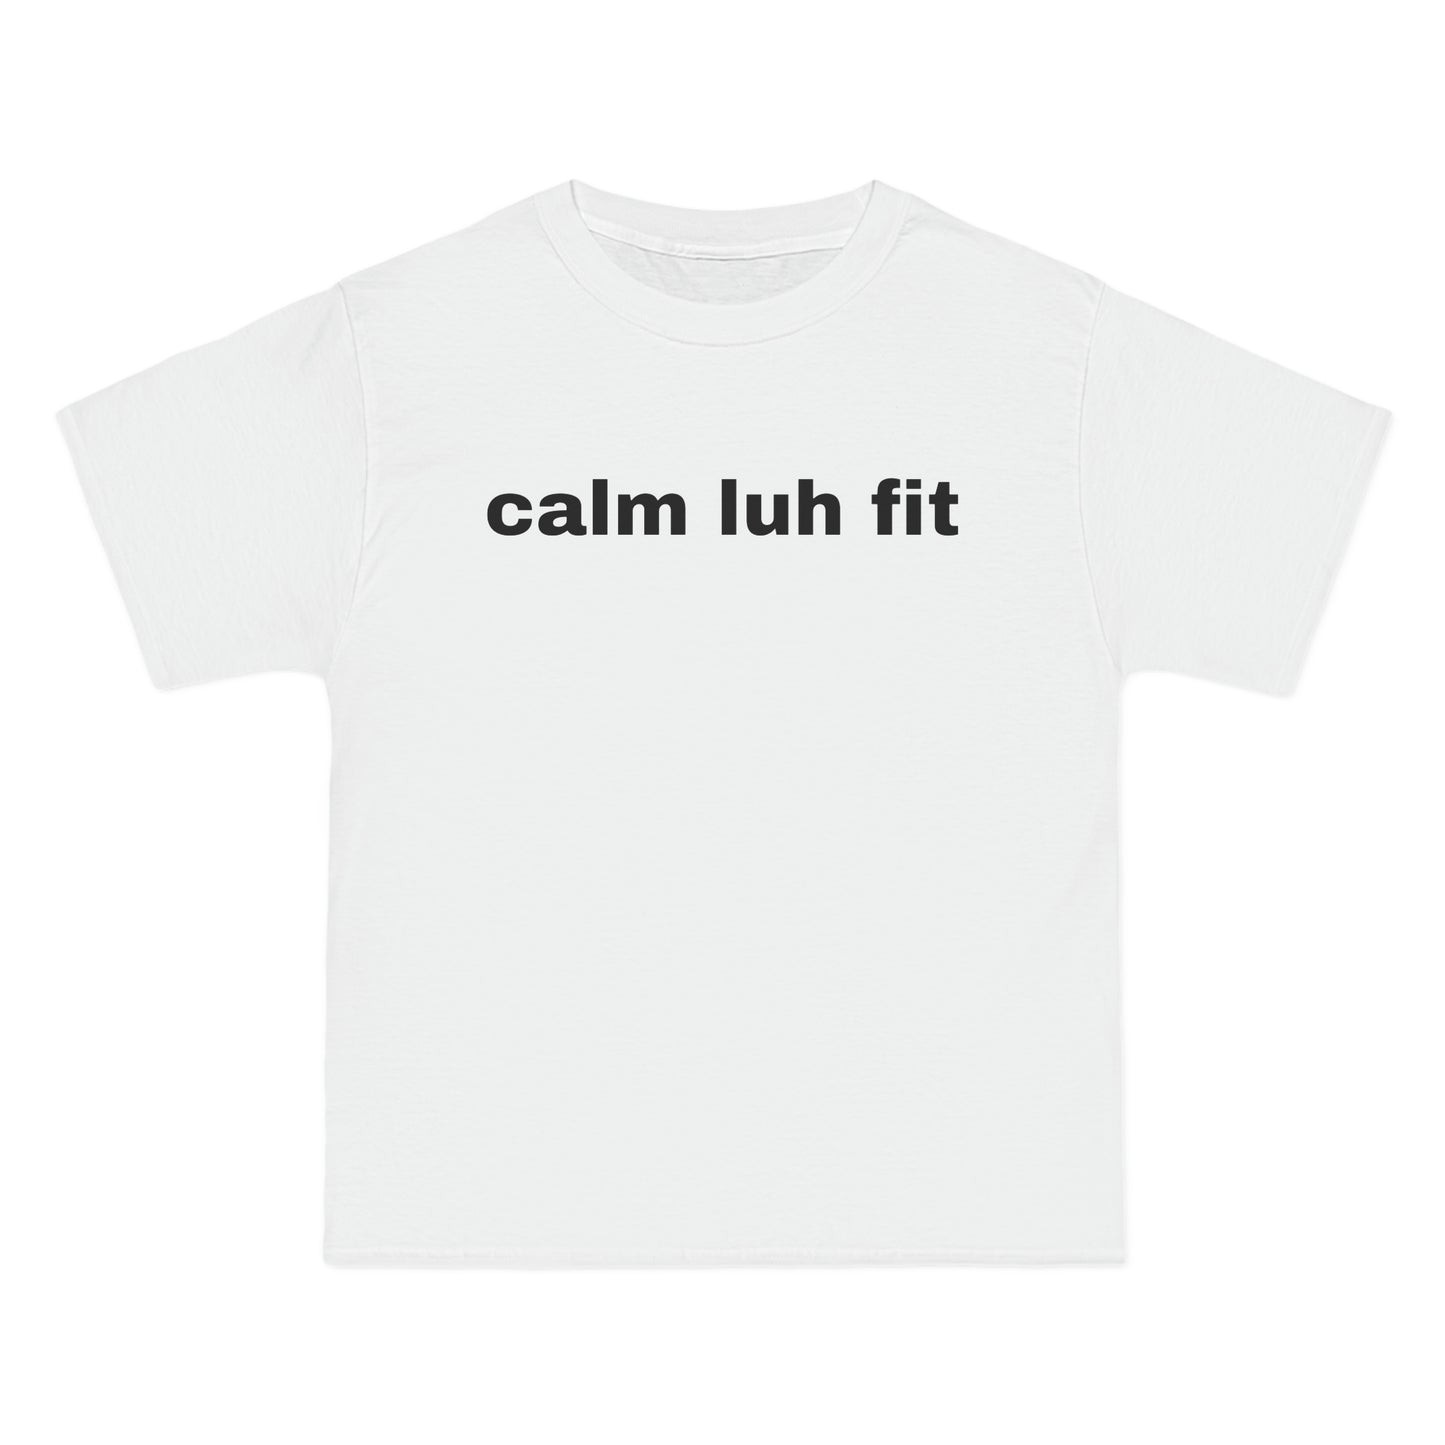 calm luh fit Tee